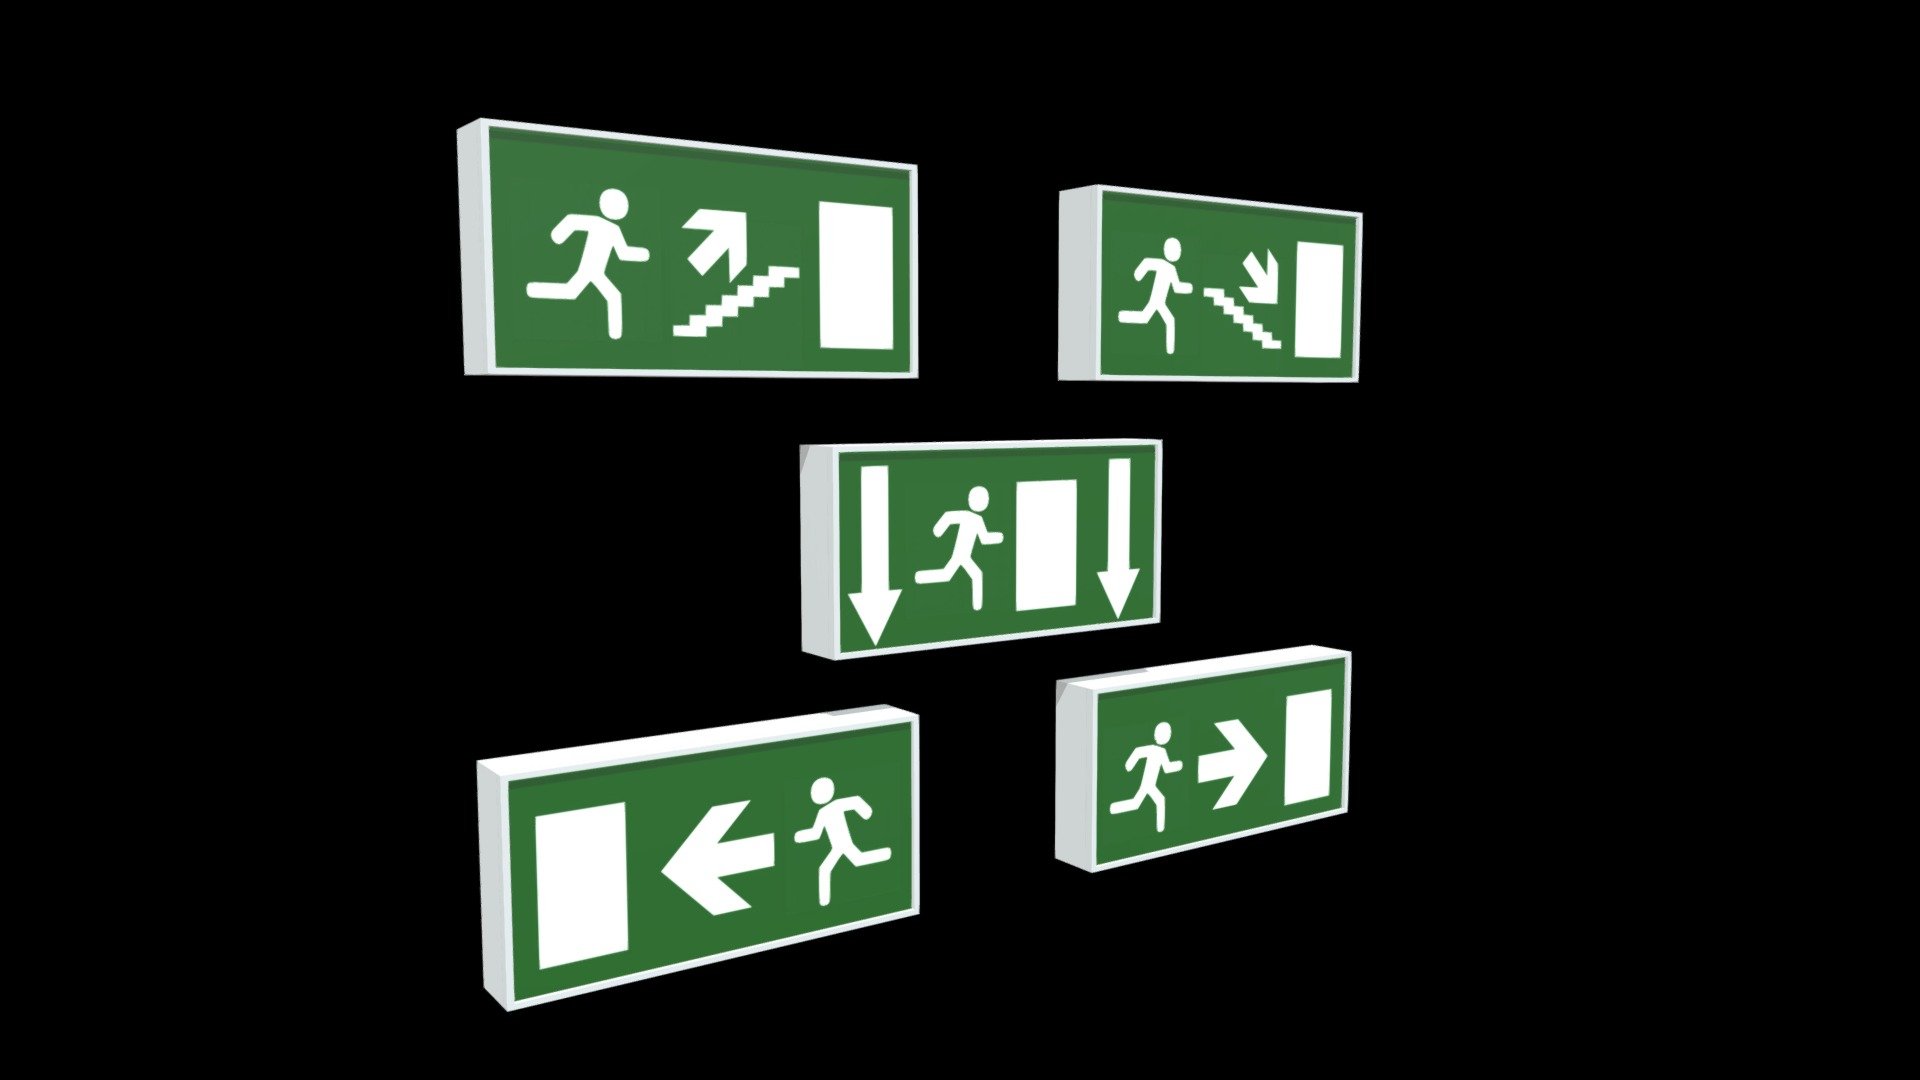 === The following description refers to the additional ZIP package provided with this model ===

Emergency exit signs 3D Model. 10 individual objects (5 cases, 5 panels), sharing 2 non overlapping UV Layout maps, Materials (cases, signs; so, you can easily turn them in emitting panels) and PBR Textures sets. Production-ready 3D Model, with PBR materials, textures, non overlapping UV Layout map provided in the package.

Quads only geometries (no tris/ngons).

Formats included: FBX, OBJ; scenes: BLEND (with Cycles / Eevee PBR Materials and Textures); other: png with Alpha.

10 Objects (meshes), 2 PBR Materials, UV unwrapped (non overlapping UV Layout map provided in the package); UV-mapped Textures.

UV Layout maps and Image Textures resolutions: 2048x2048; PBR Textures made with Substance Painter.

Polygonal, QUADS ONLY (no tris/ngons); 3390 vertices, 3160 quad faces (6320 tris).

Real world dimensions; scene scale units: cm in Blender 3.1 (that is: Metric with 0.01 scale) 3d model